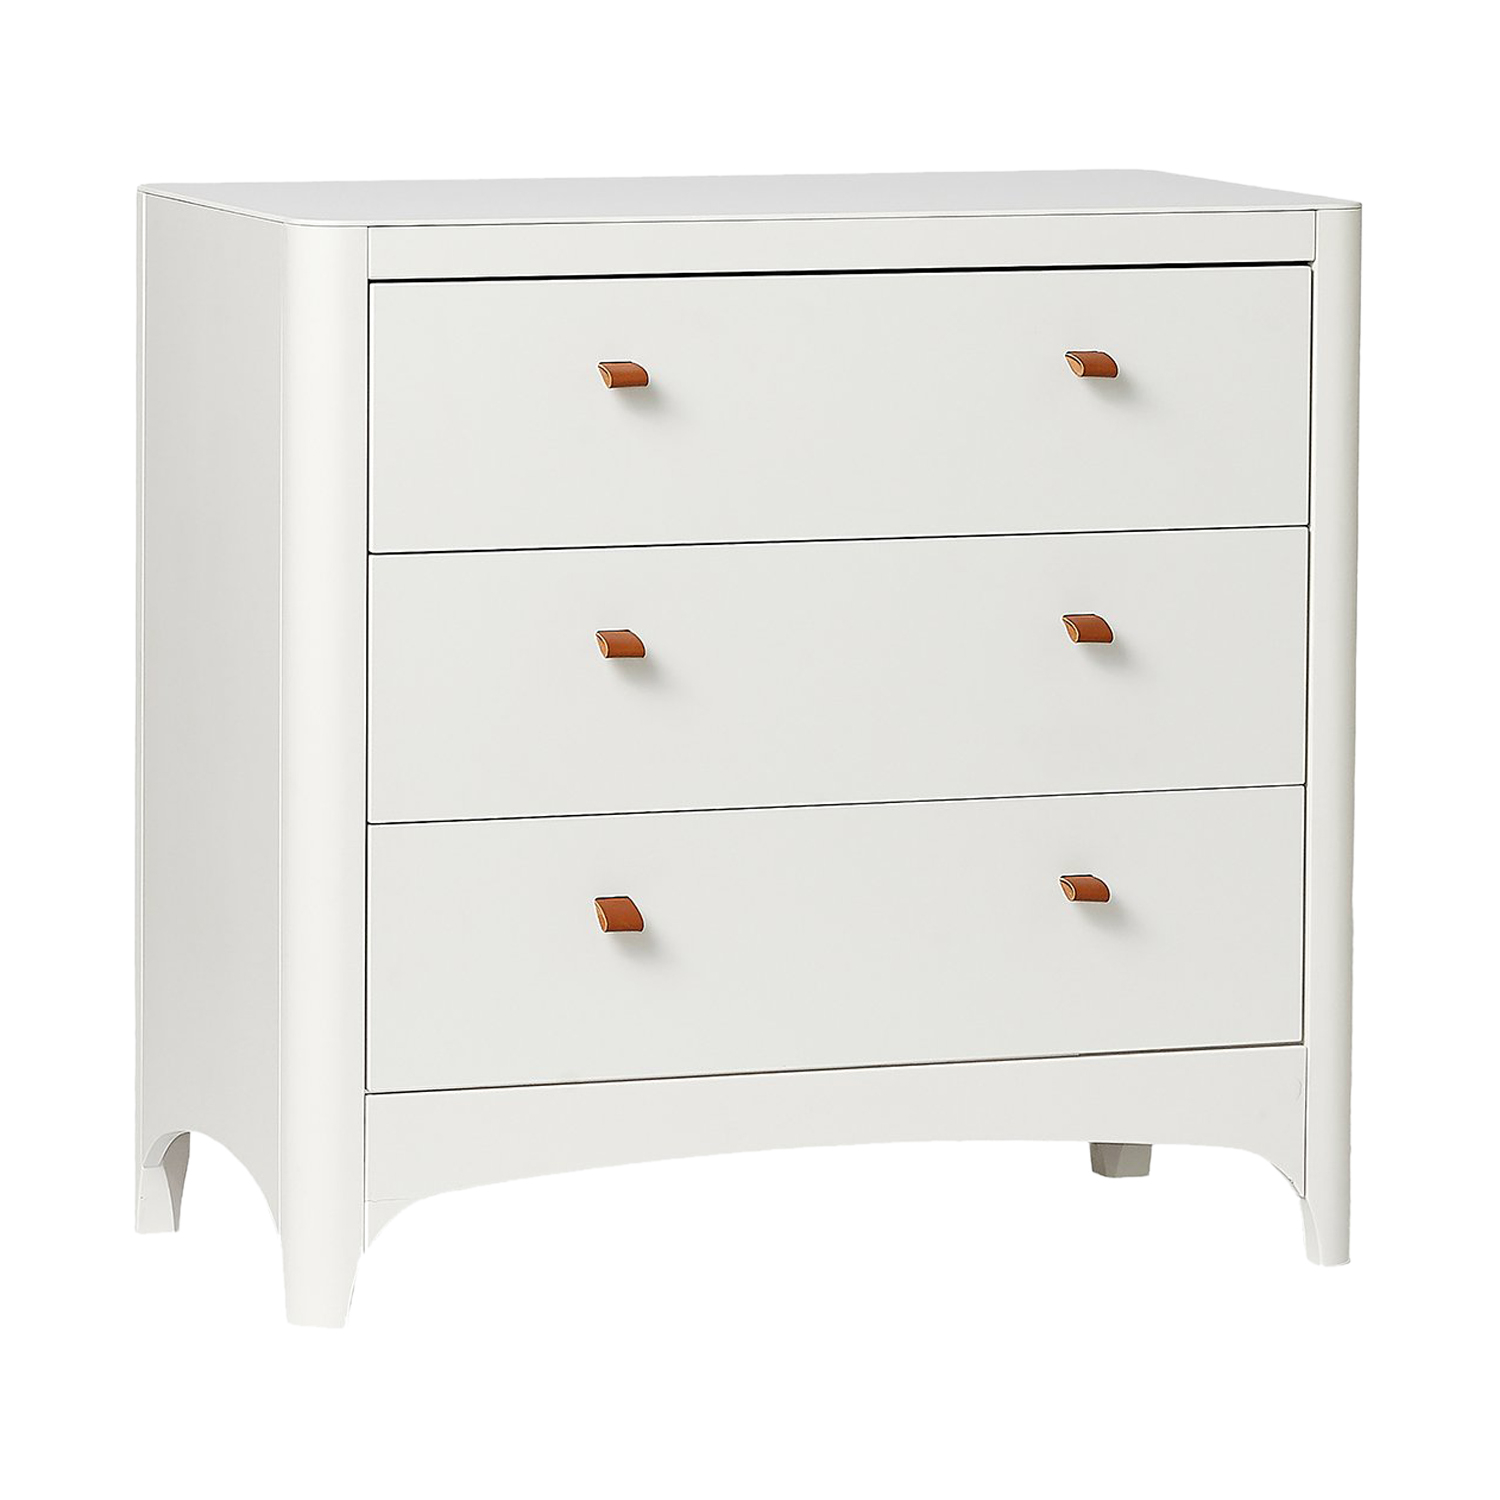 Leander Classic Commode White